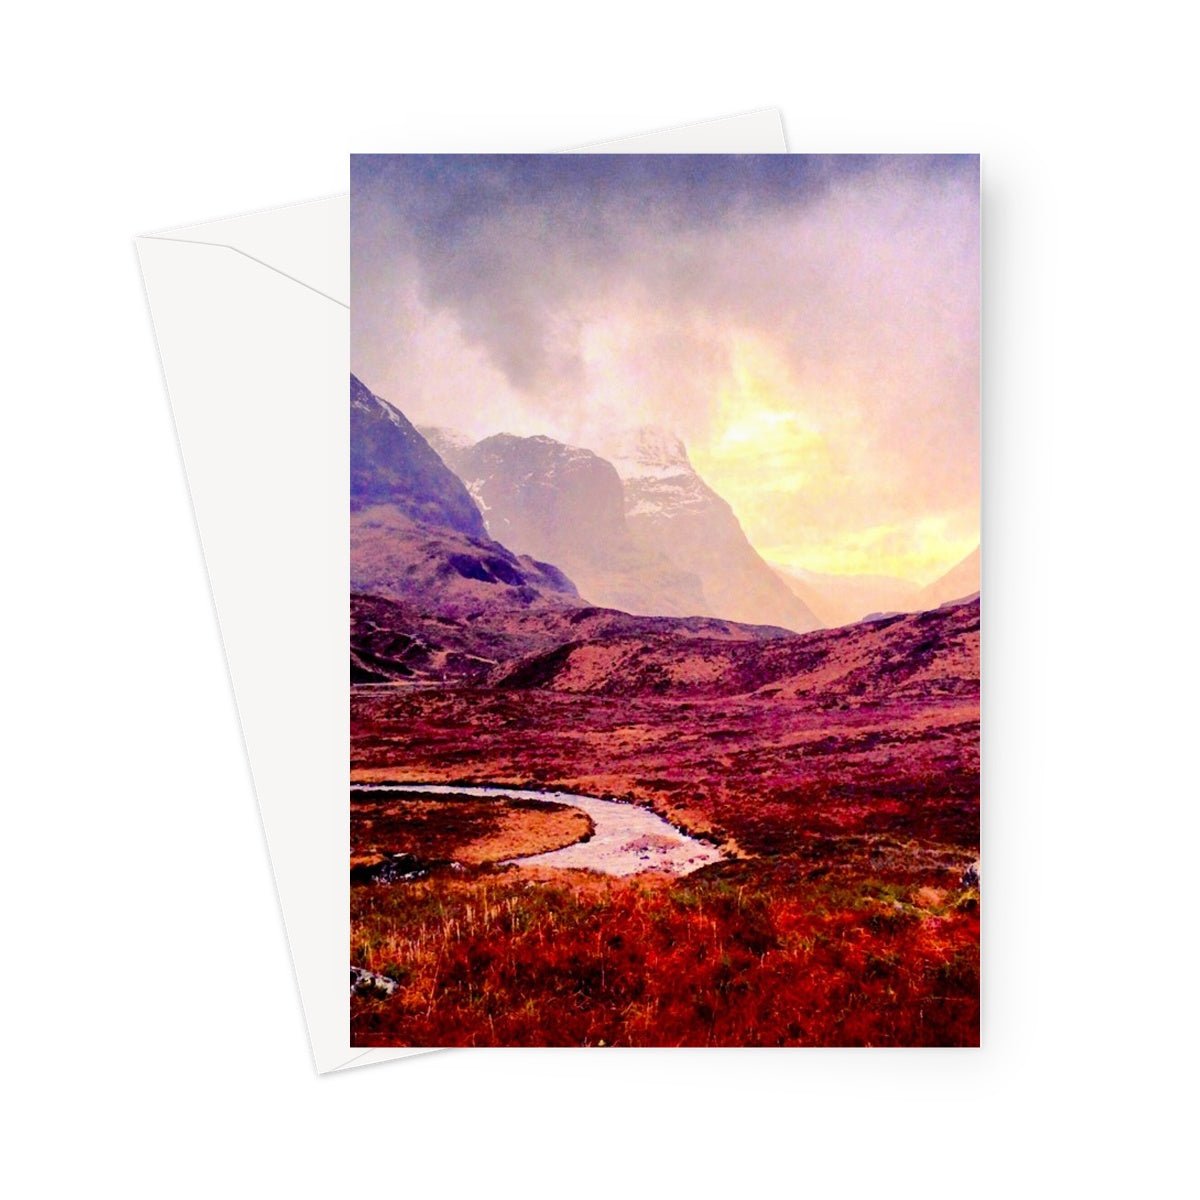 A Brooding Glencoe Art Gifts Greeting Card-Greetings Cards-Glencoe Art Gallery-5"x7"-1 Card-Paintings, Prints, Homeware, Art Gifts From Scotland By Scottish Artist Kevin Hunter